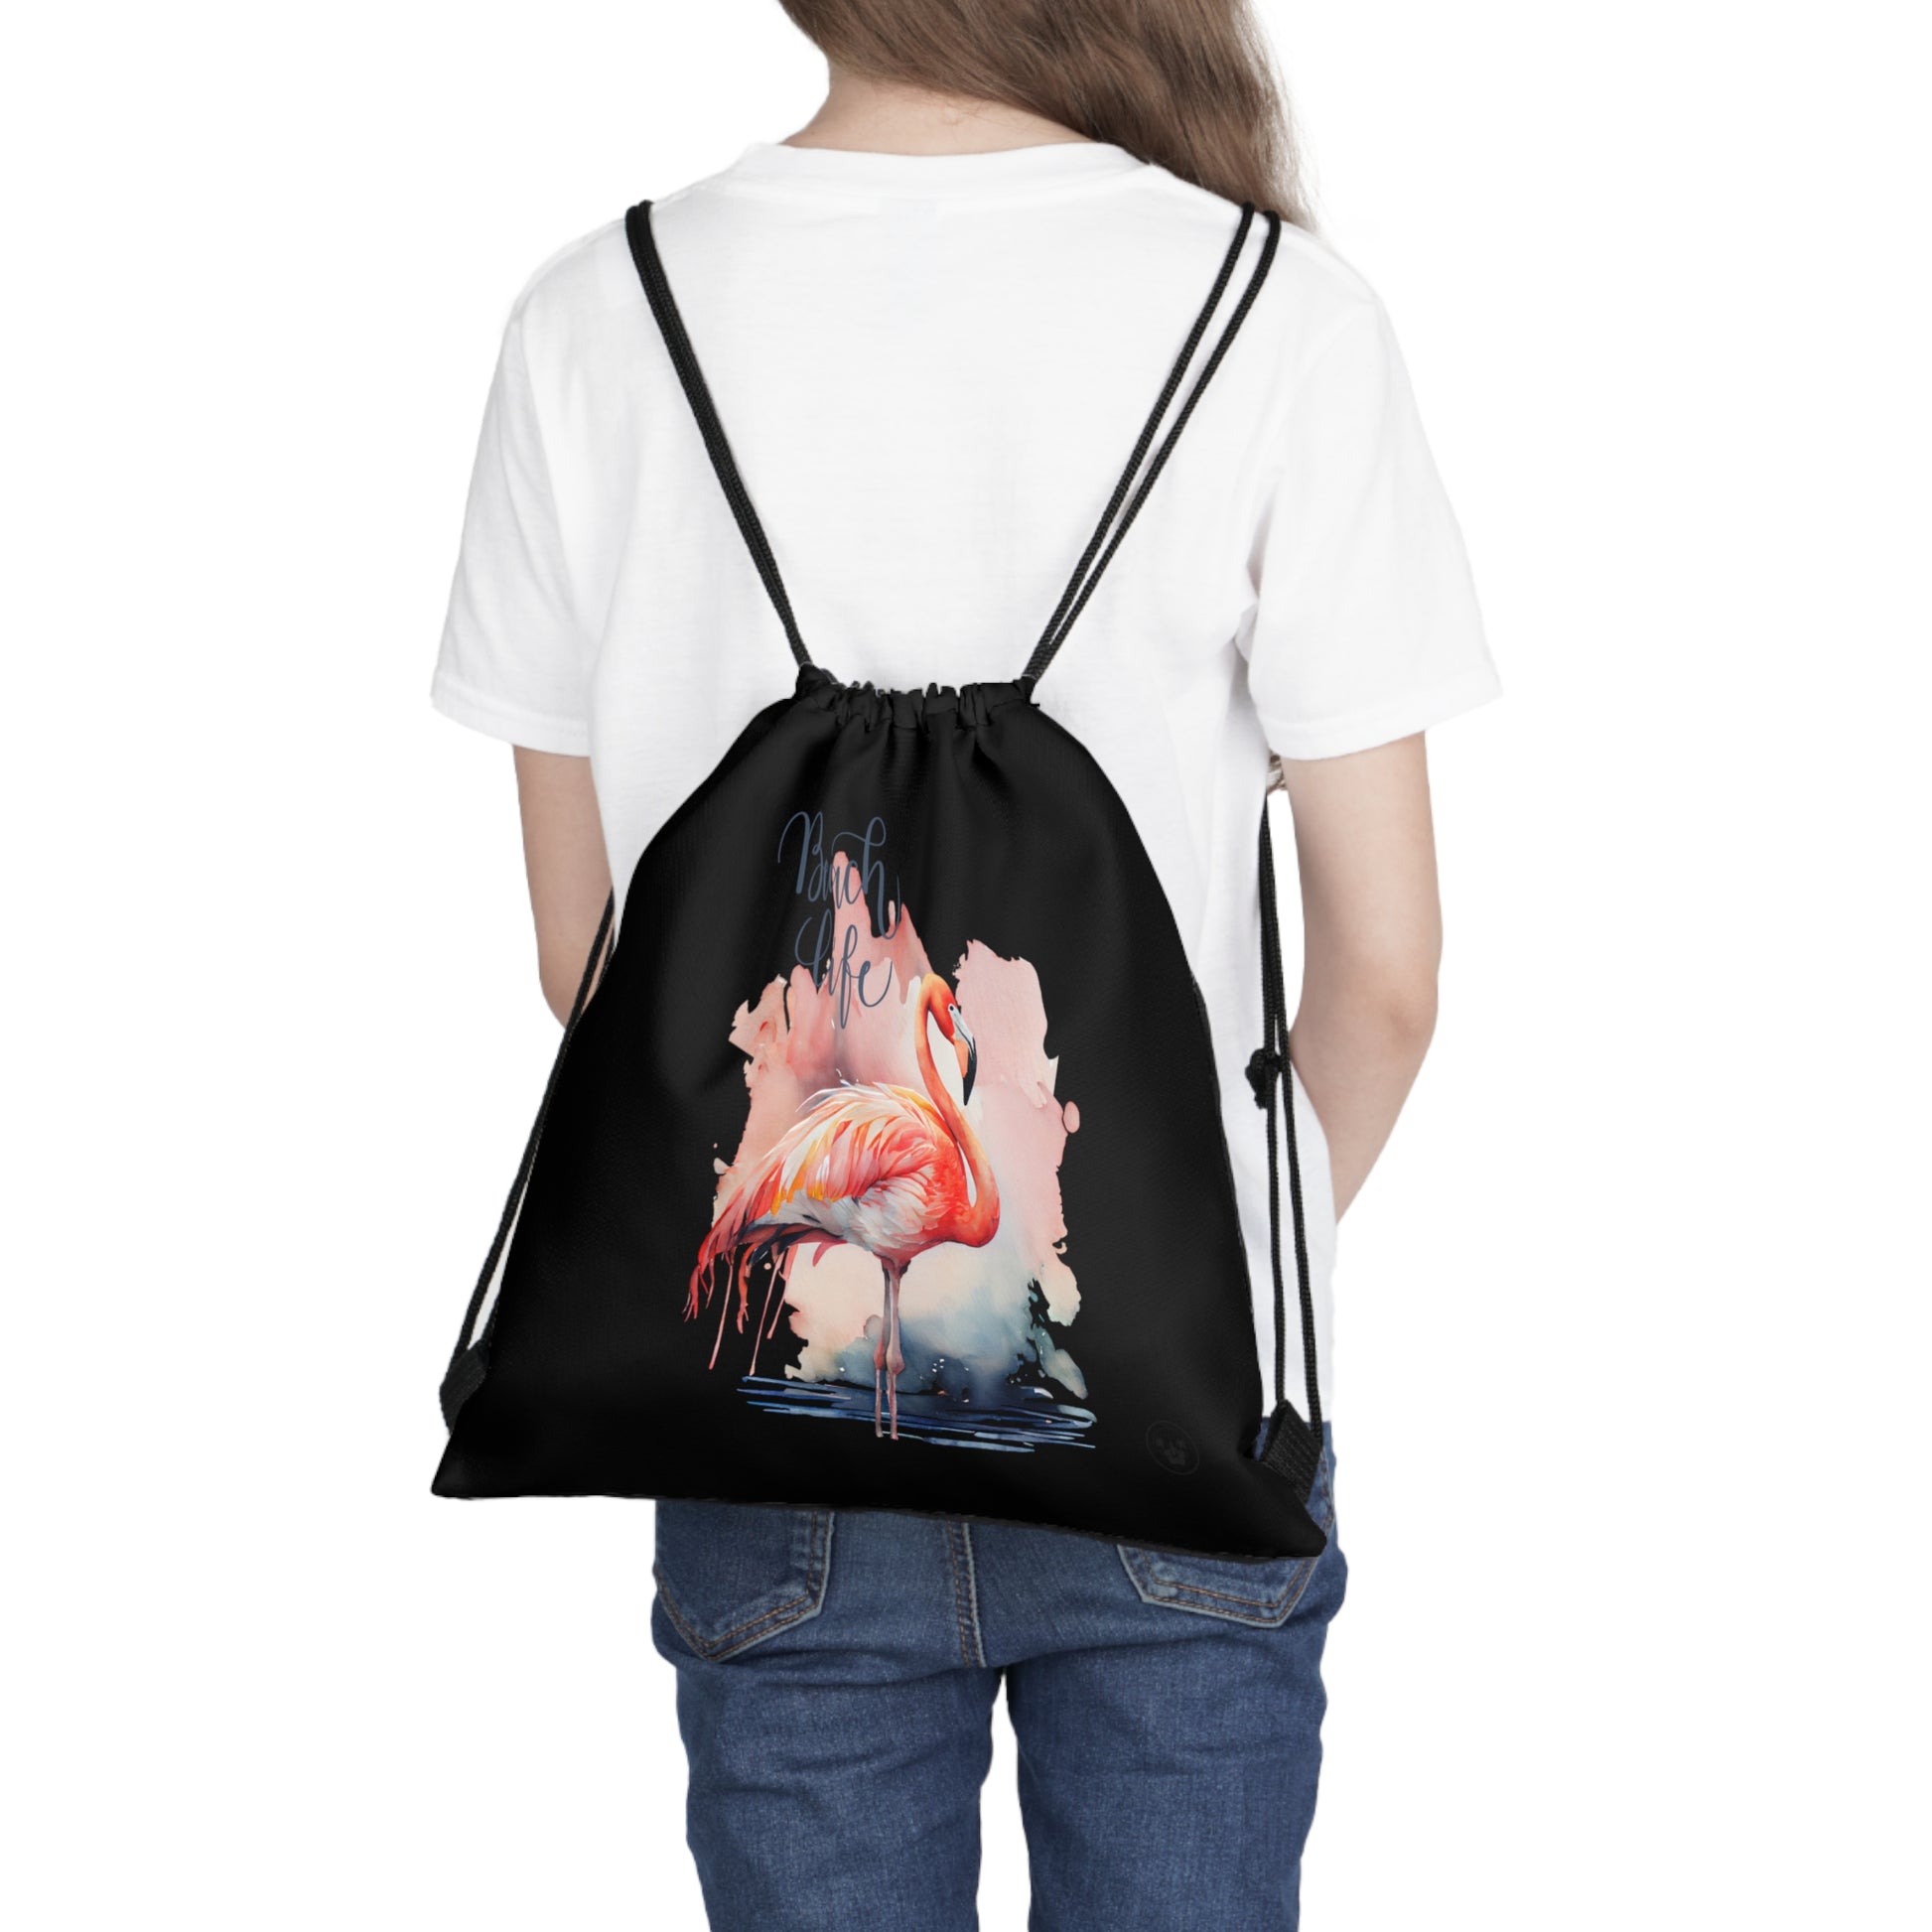 Unleash your wanderlust with our versatile drawstring backpack! Embrace travel with ease and style, flaunting a Beach Life Flamingo graphic with bright color backgrounds. This one is a black background. Designed for adventurers, it's the perfect blend of practicality and fashion. Get yours today for your next adventure! This is a front view of the backpack on the back of a model. 